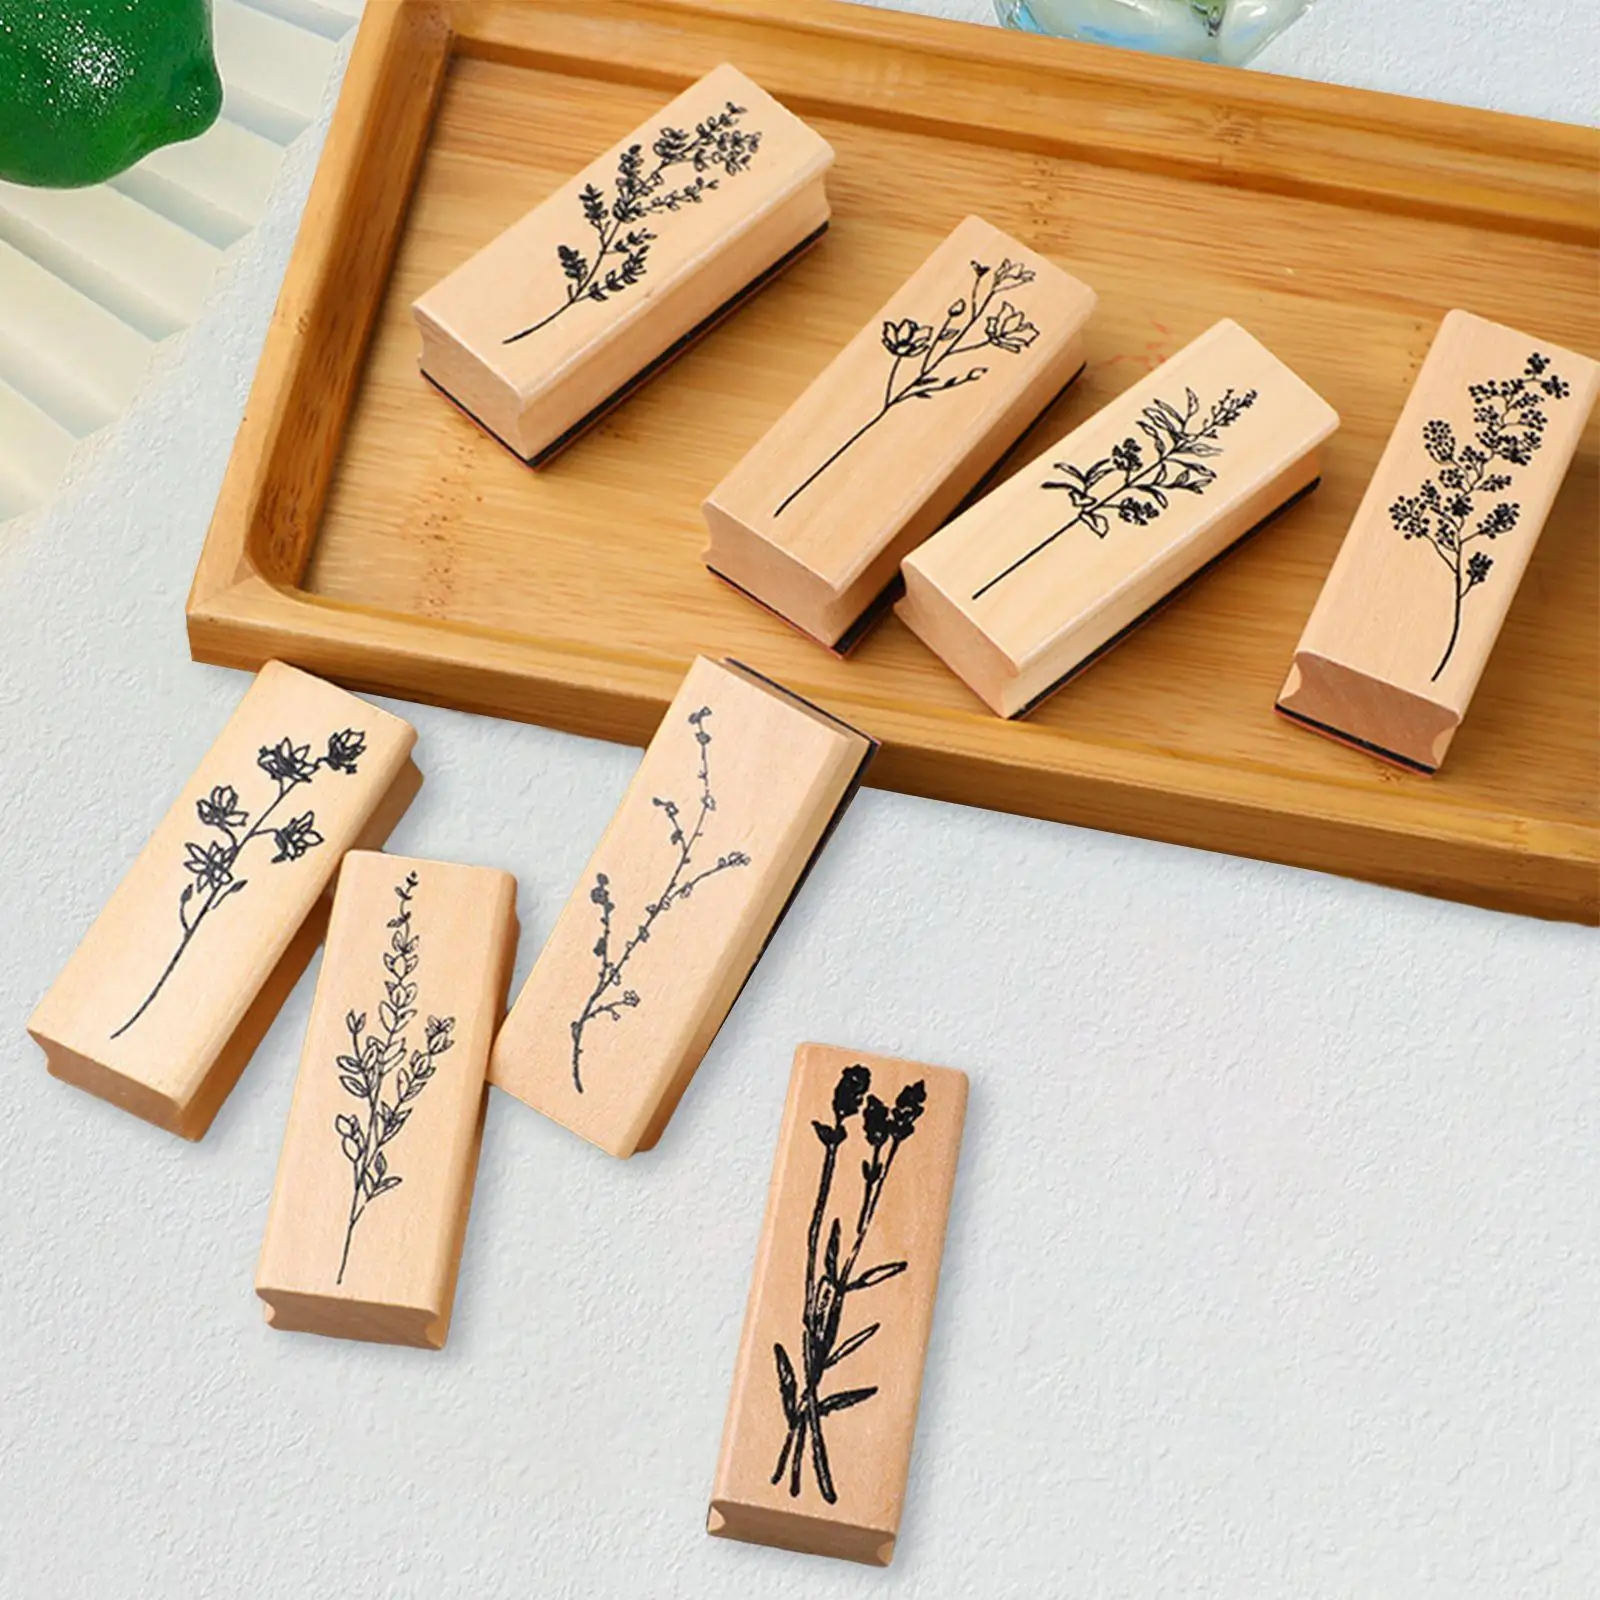 8Pcs Wooden Mounted Stamps Scrapbook DIY Crafts Stationery Wood Rubber Stamp Set for Teaching Kids Photo Album Journals Crafting